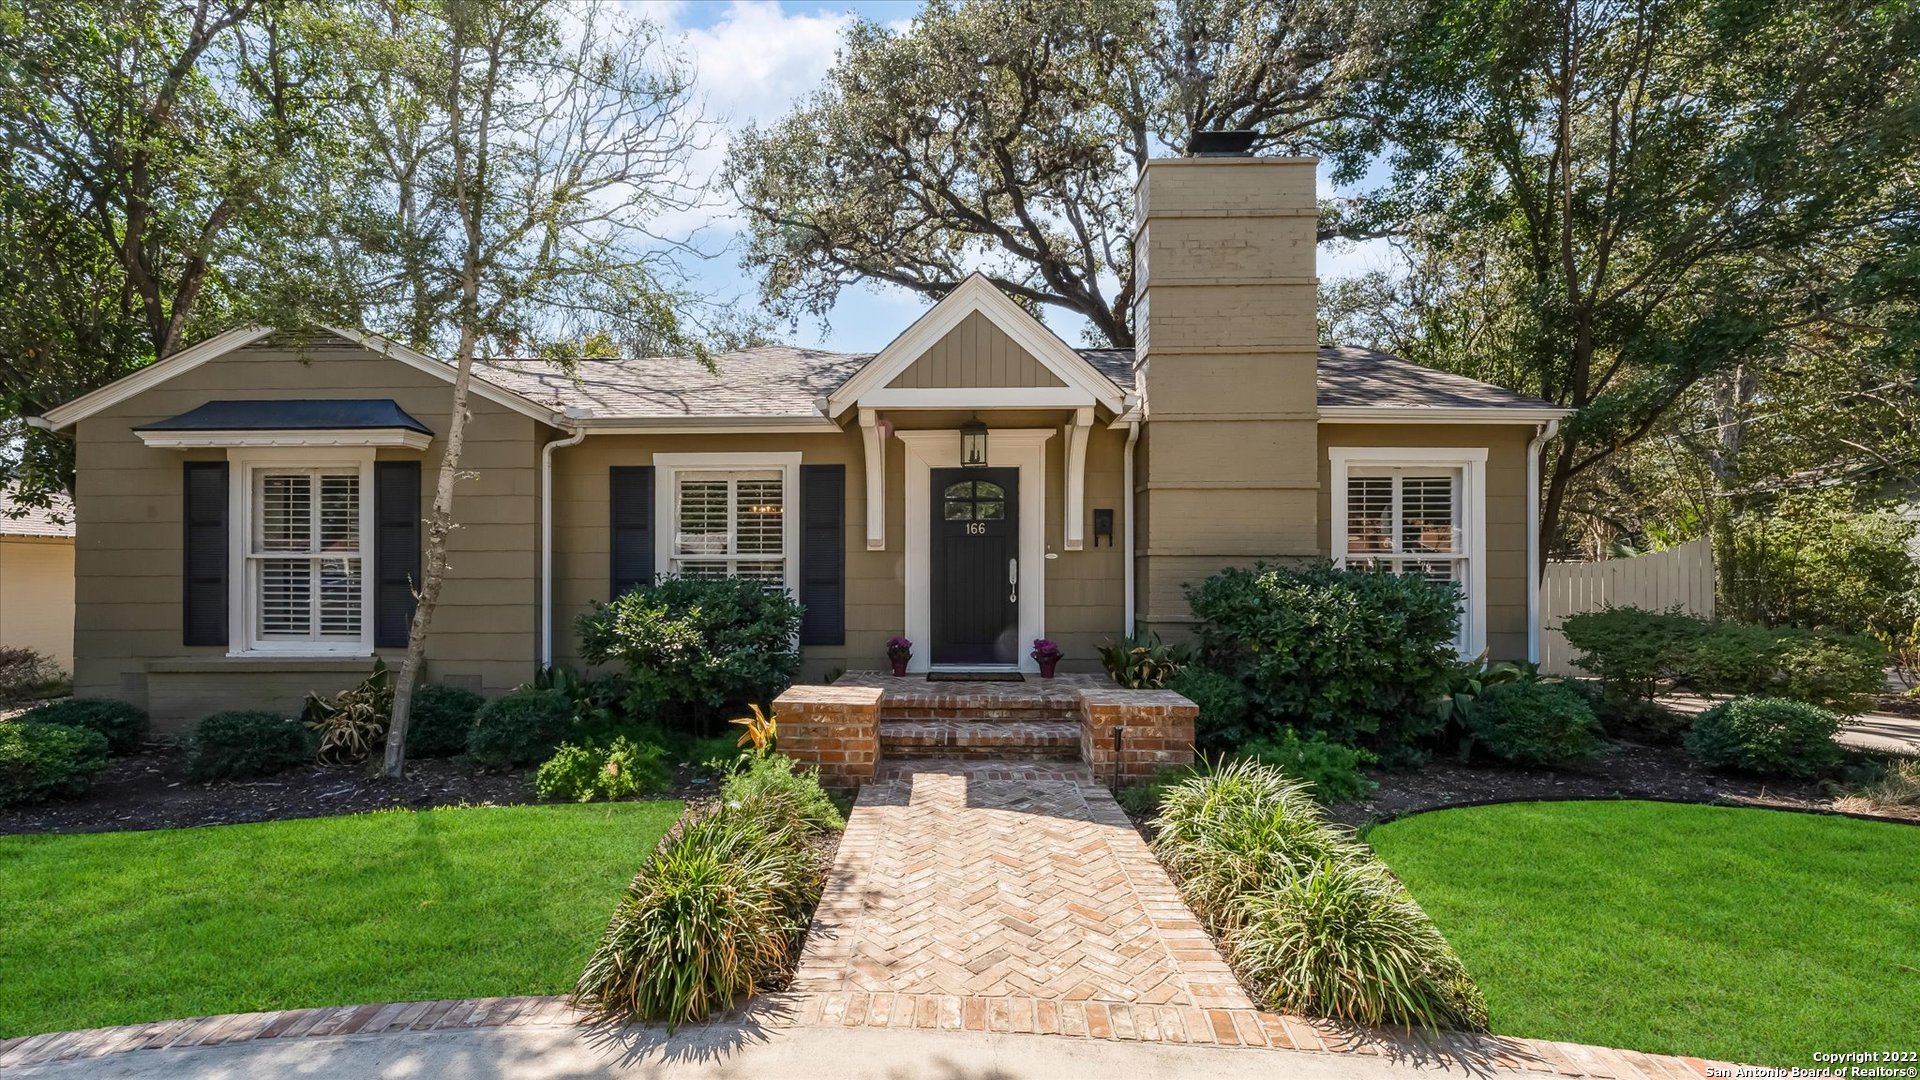 Fantastic one-story in the heart of Alamo Heights! Recently remodeled with luxury finishes. Oversized marble kitchen island overlooks the family room with windows lining the living room all the way down to the primary suite. Custom fixtures throughout, plantation shutters, and tons of natural light. Owner's retreat features two oversized walk-in closets, oversized double vanities, XL shower, and soaker tub. Circle drive greets guests in the front with ample parking. Automatic electric gate on the driveway securely encloses backyard and driveway. Garage opens to both driveway and alleyway.  Seller is licensed real estate agent.